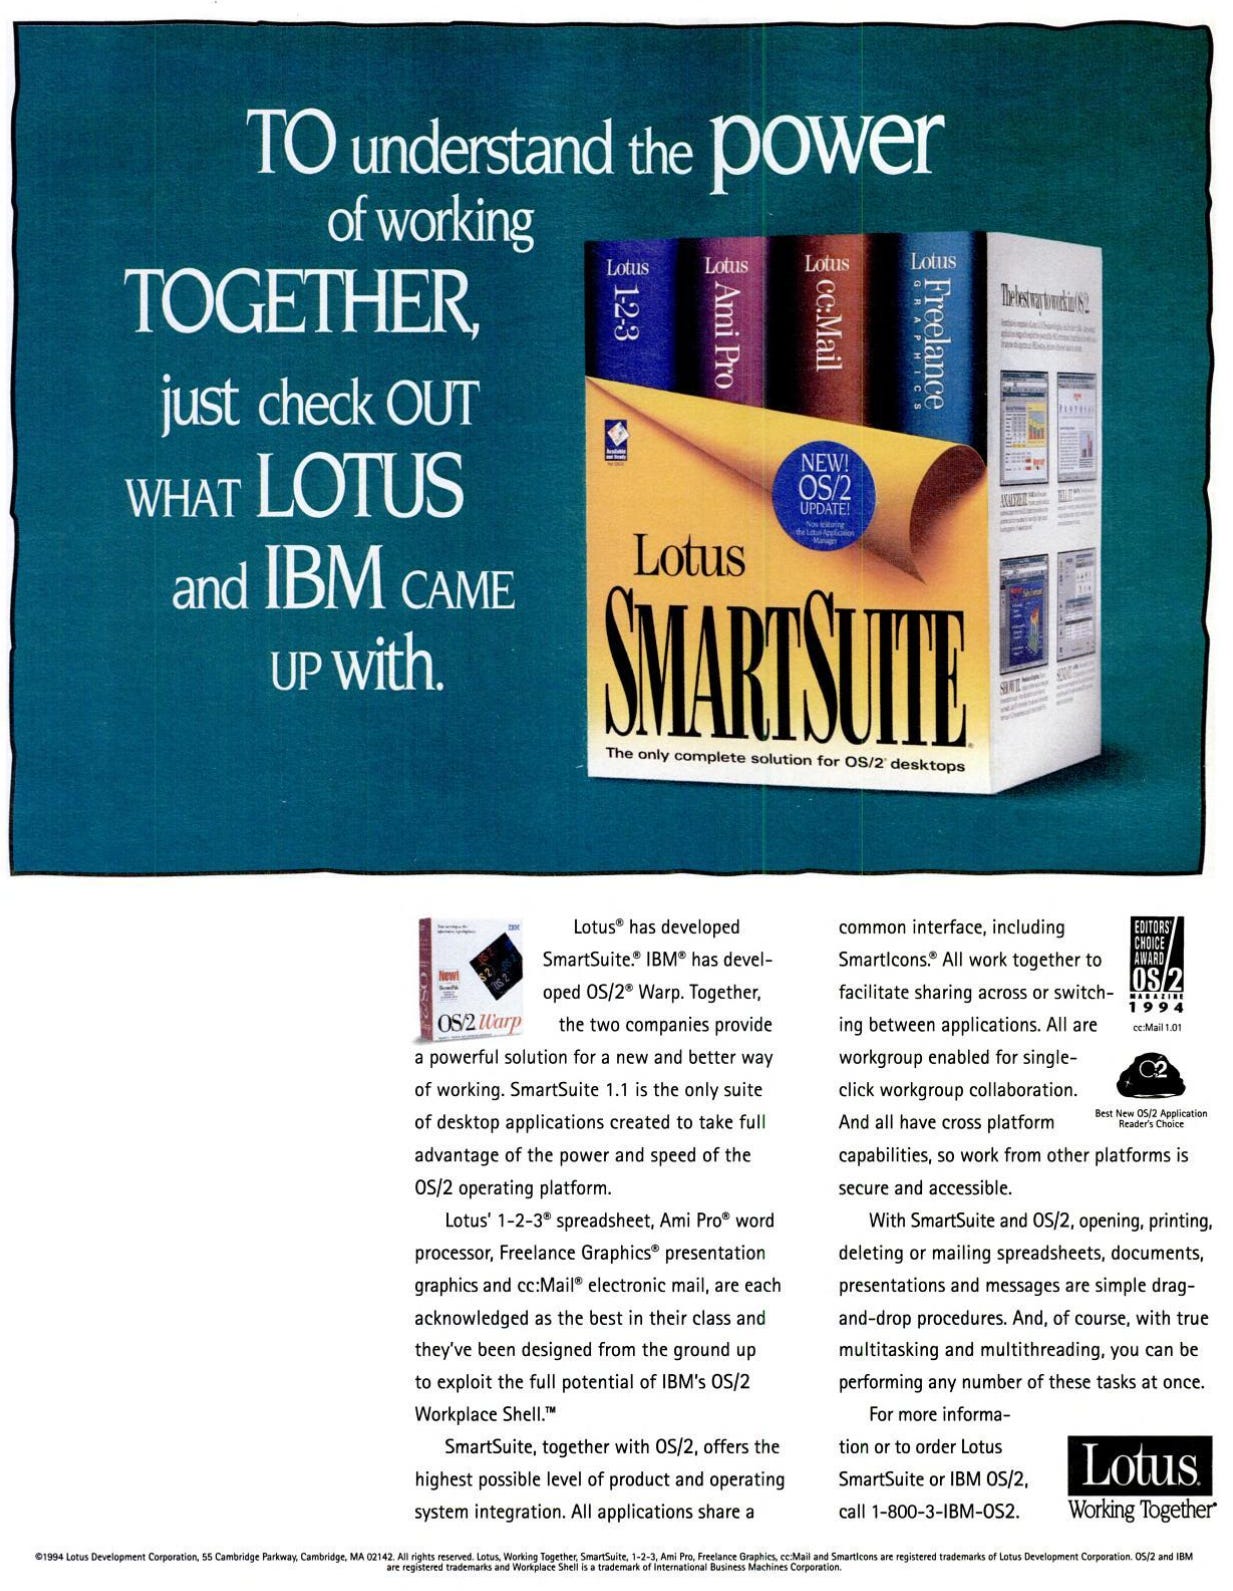 Full page advertisement for Lotus SmartSuite "To understand the power of working together just check out what LOTUS and IBM came up with"